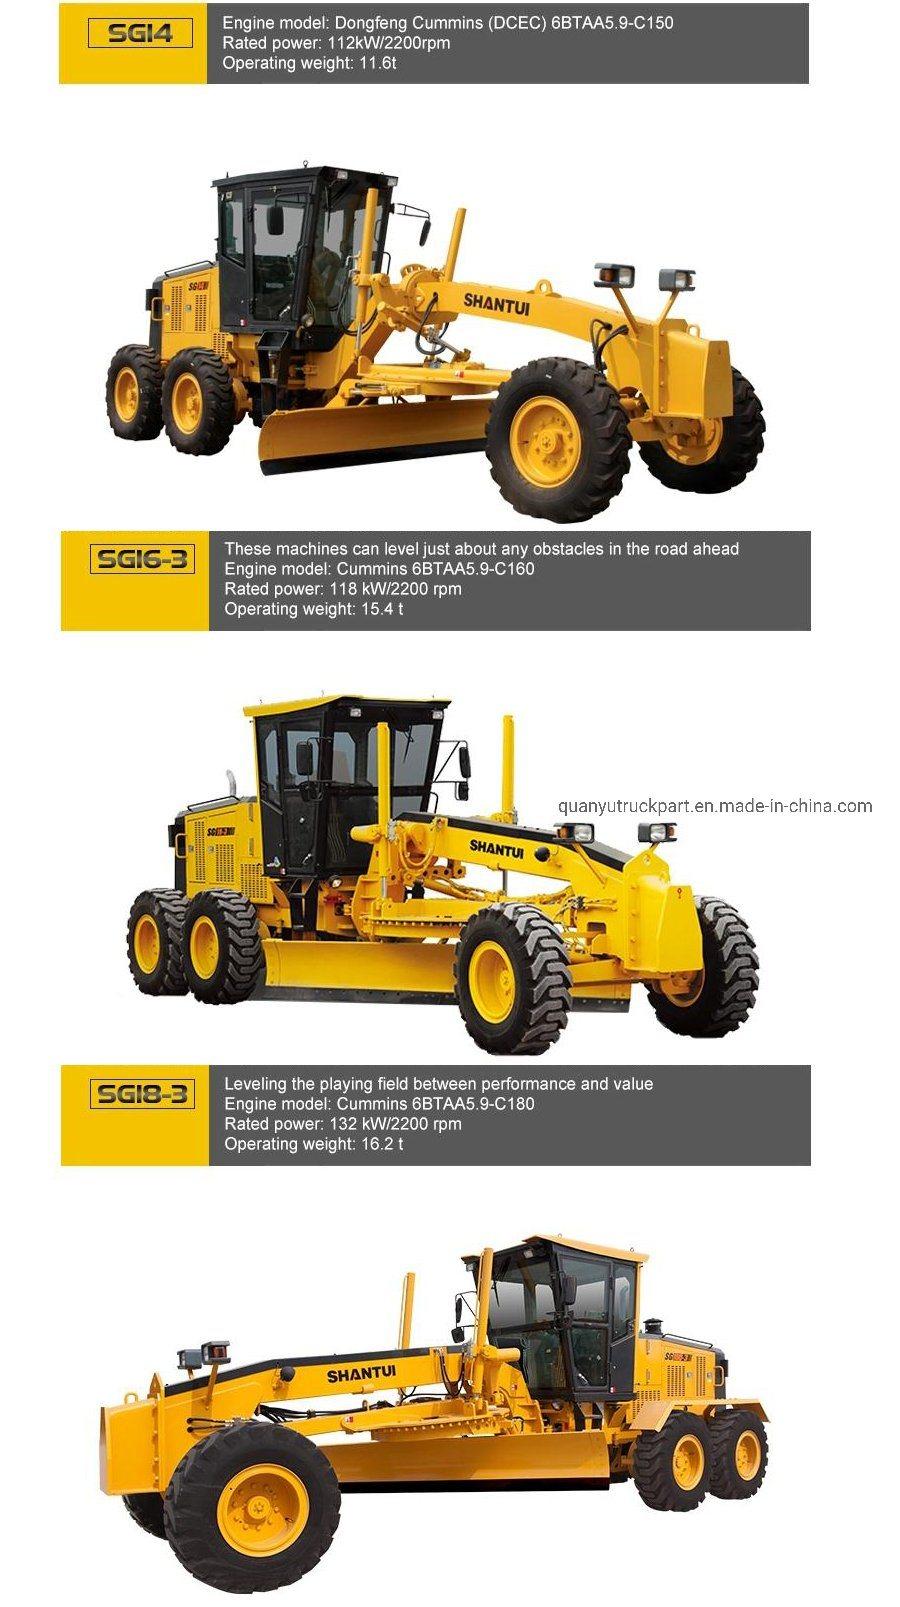 Hot Sale China Famous Brand Shantui 160kw Motor Grader Sg21A-3 with Cheap Price